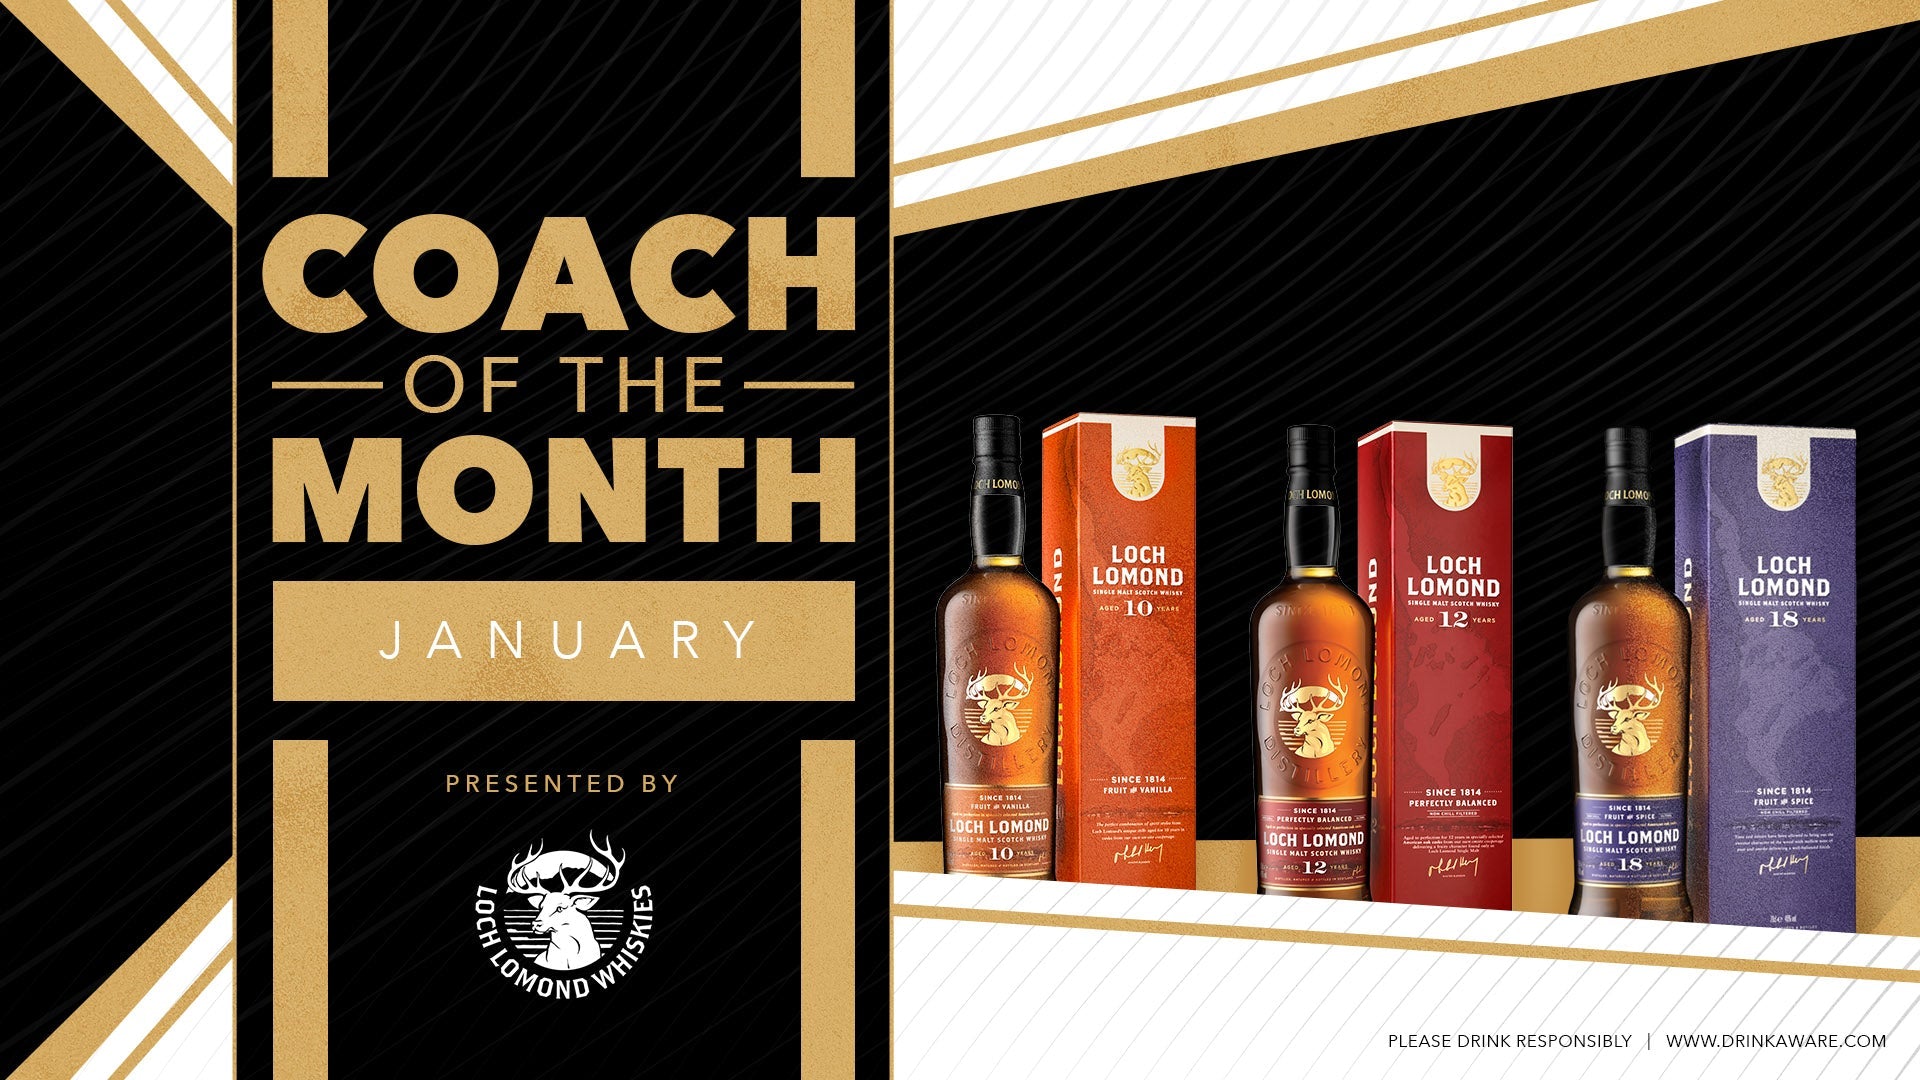 Coach of the Month - Rugby